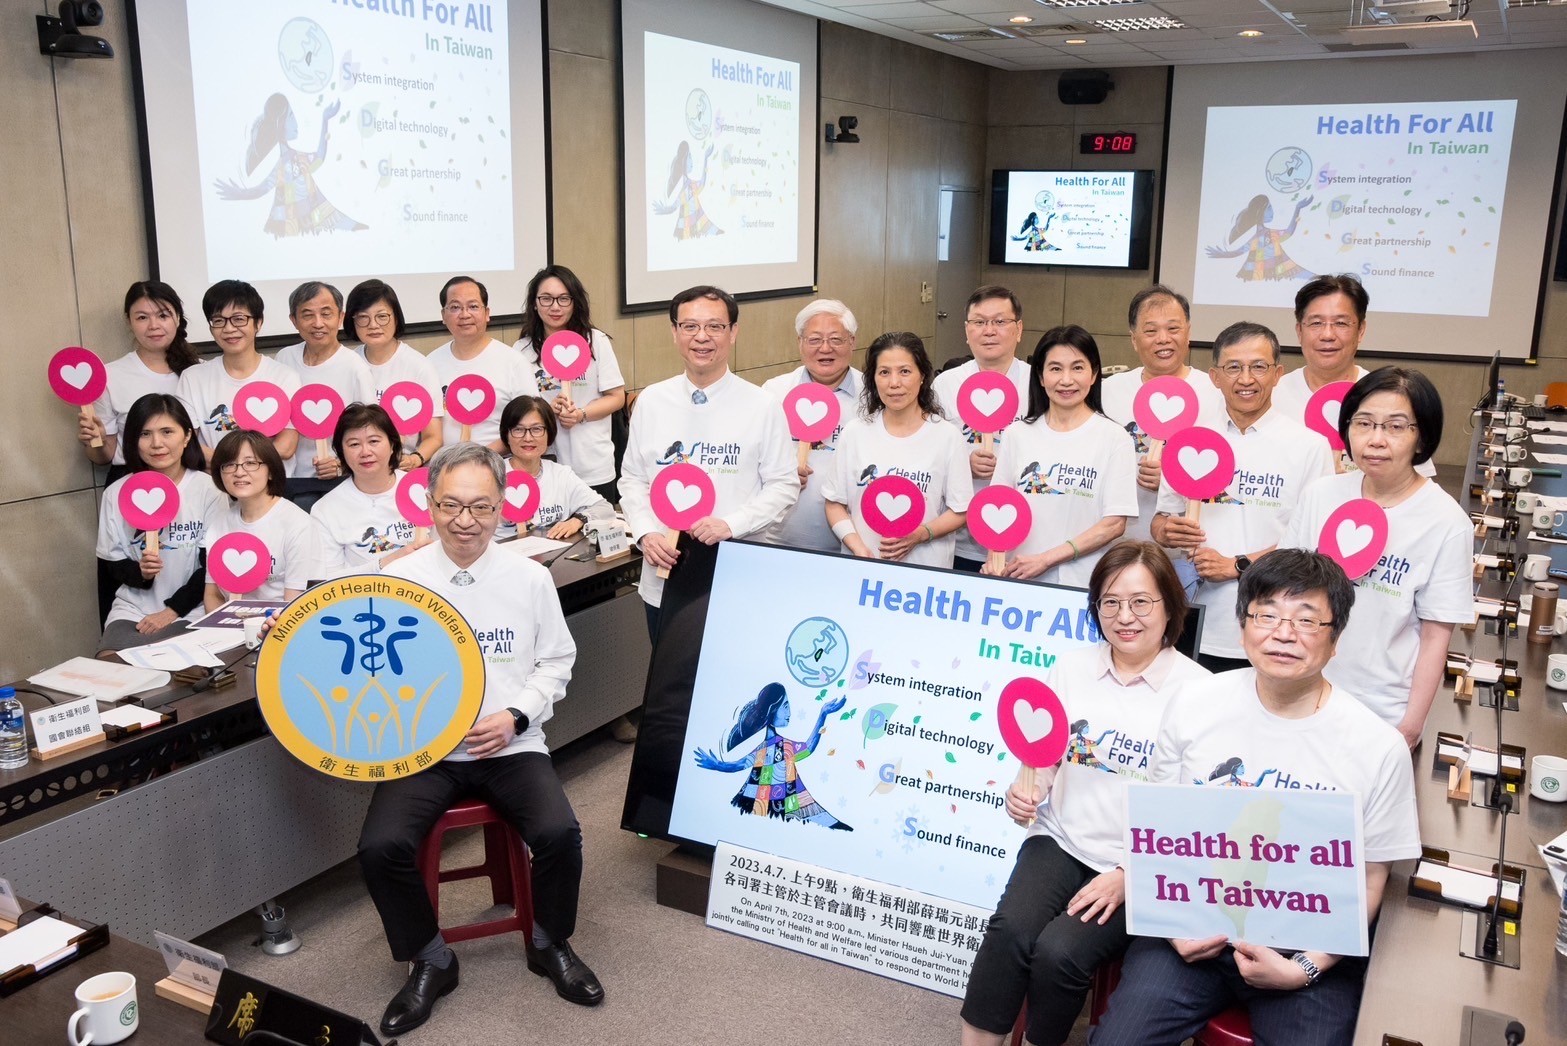 Celebrating 28 years of National Health Insurance and Ensuring Health for All in Taiwan